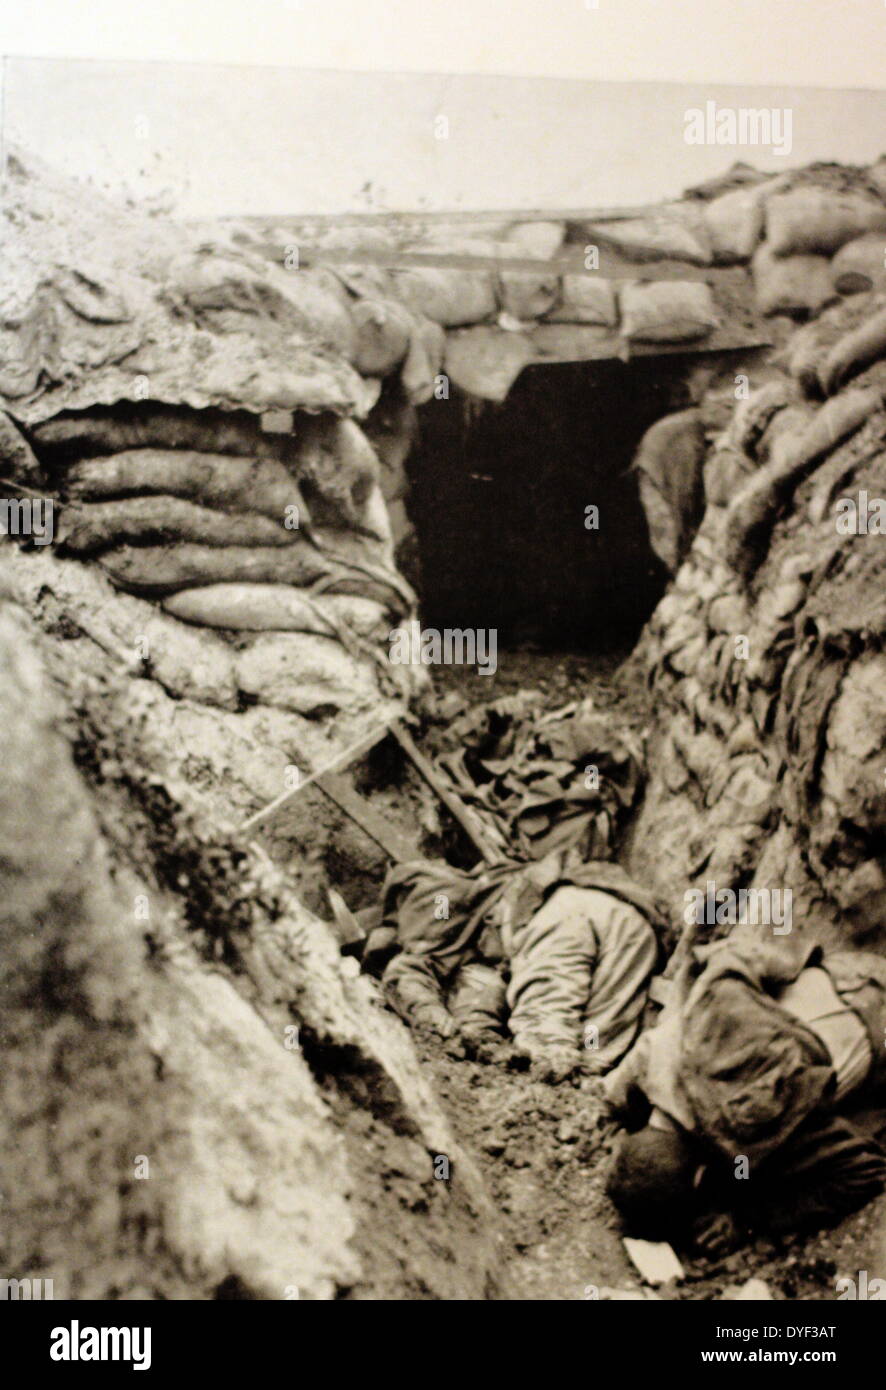 A photograph from the First World War, showing the trenches soldiers lived in during battles.  First World War, circa 1914-1918. Stock Photo